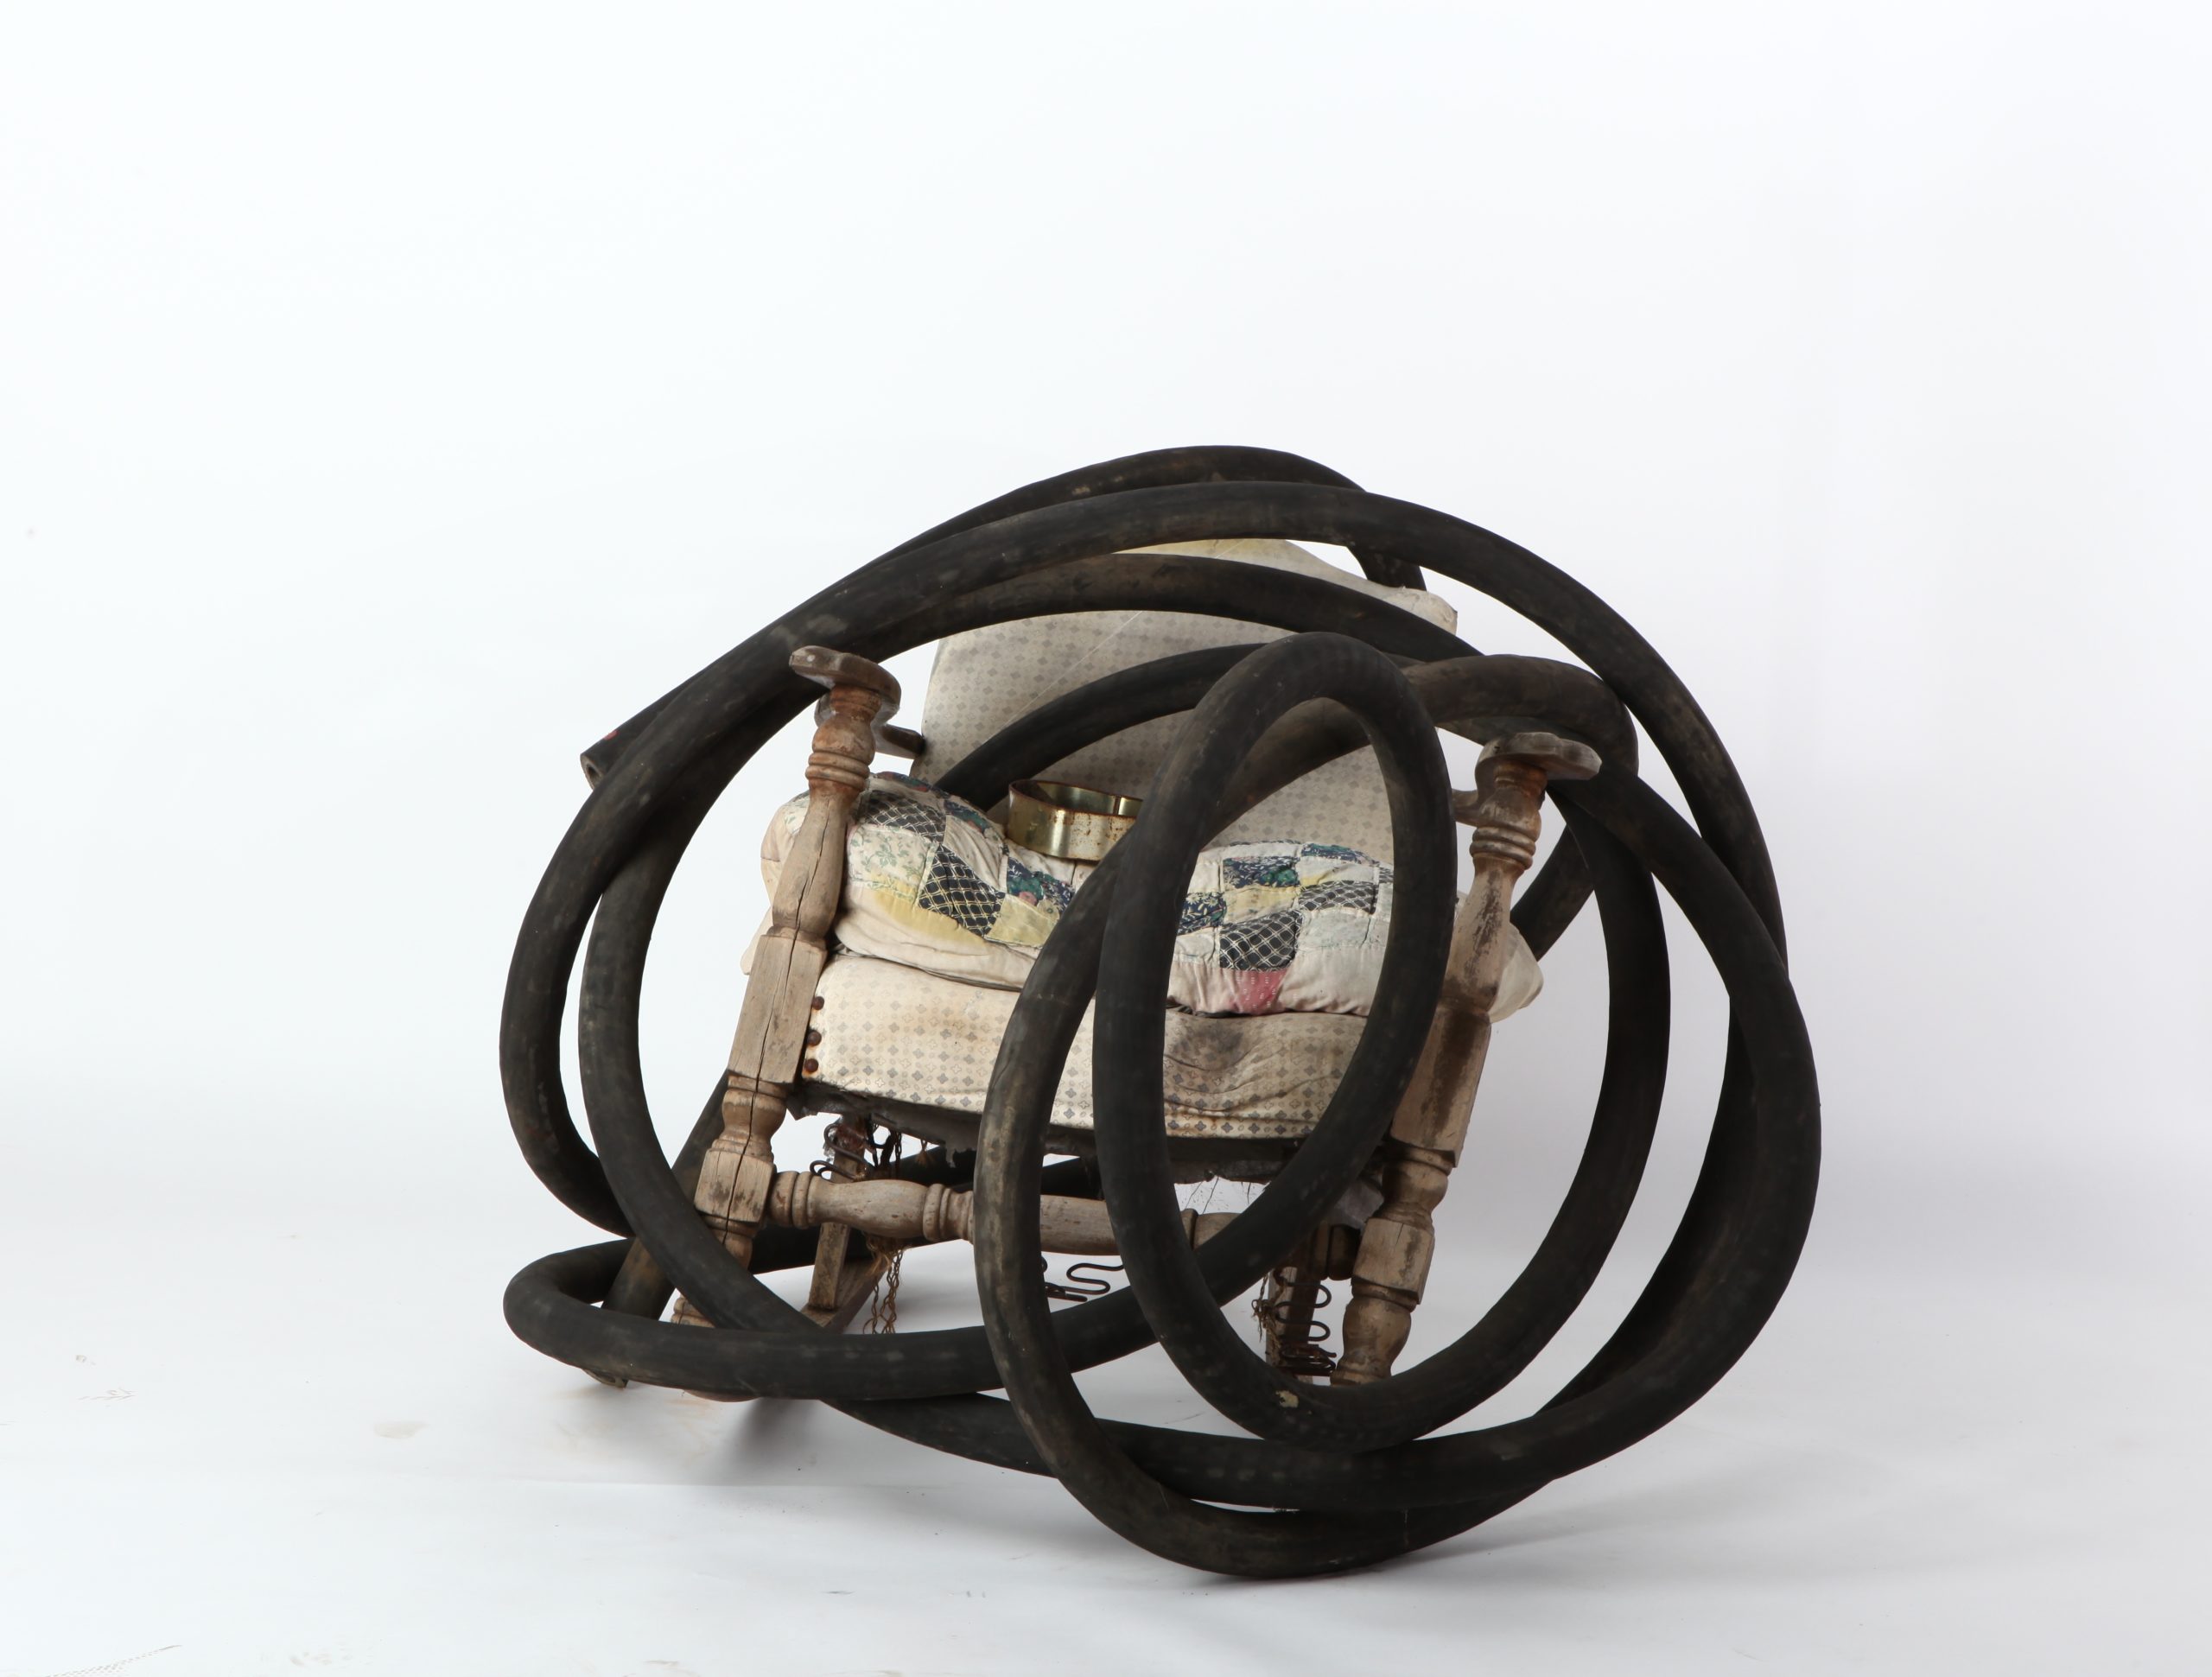 Lonnie Holley, WEIGHED DOWN BY THE HOSE, 2008
Found rocking chair, old quilt, heart-shaped box, rubber hose Image courtesy of the artist